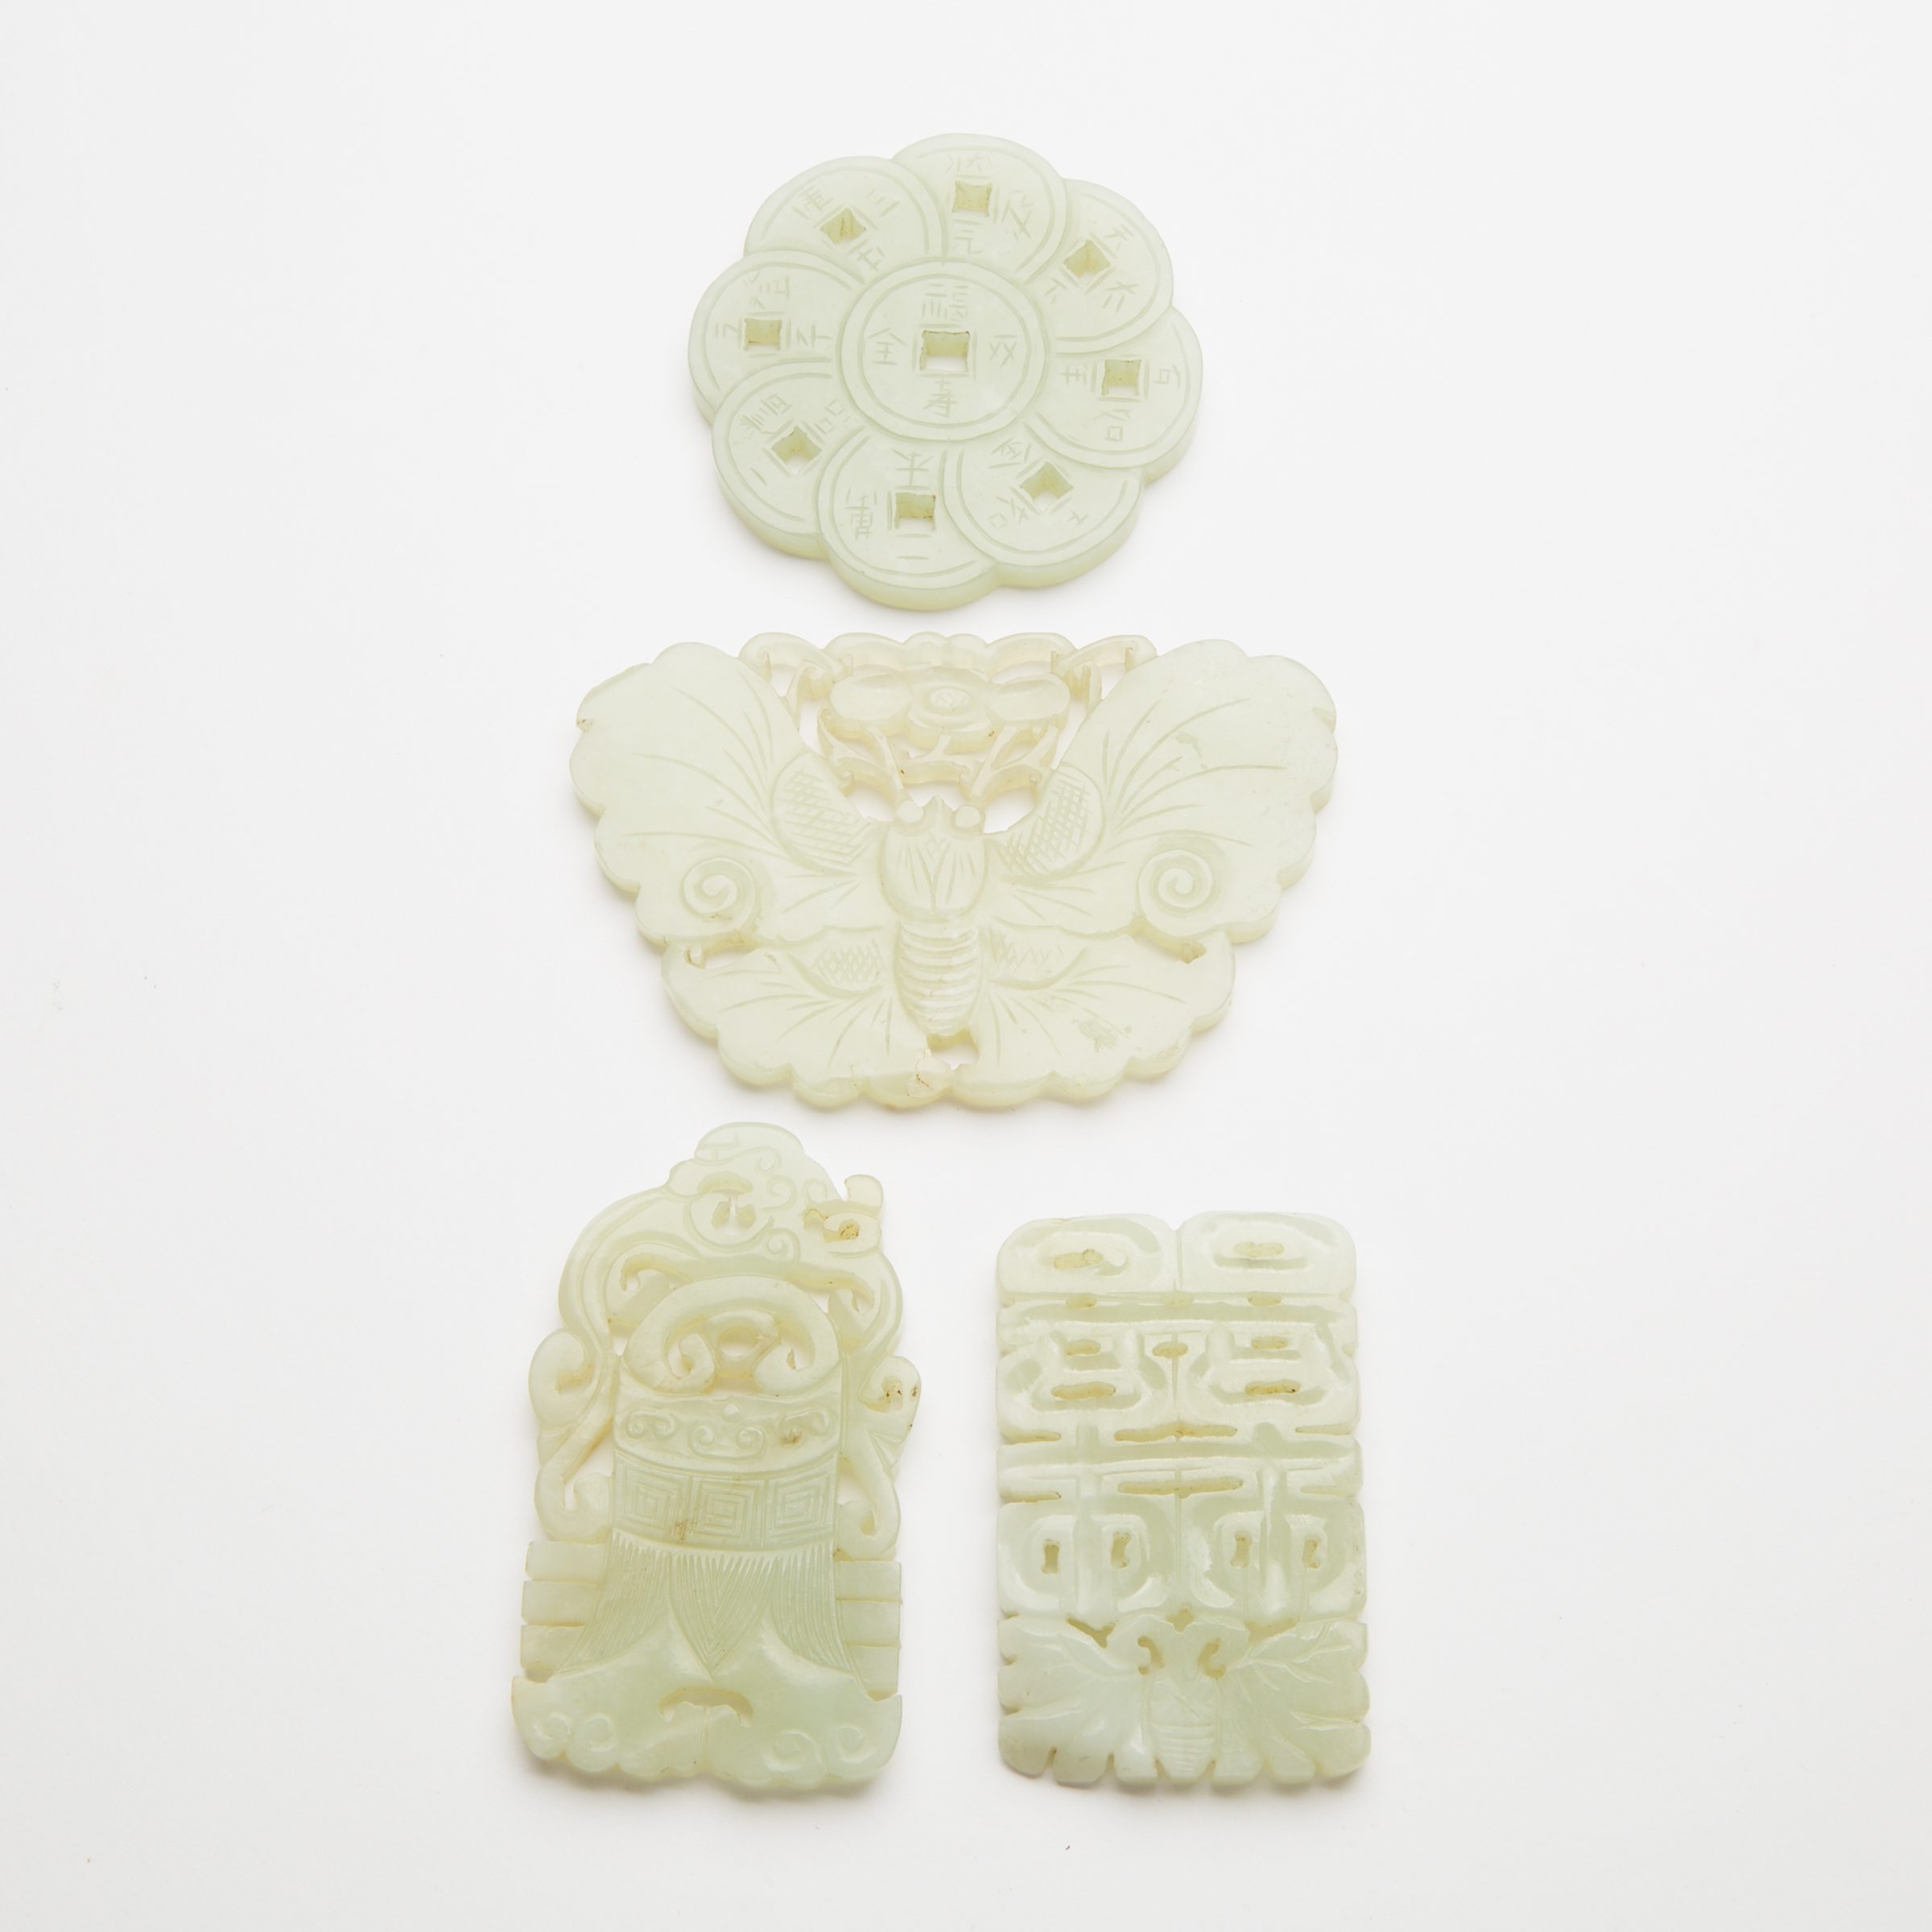 A Group of Four White Jade Reticulated Plaques, Qing Dynasty, 19th Century